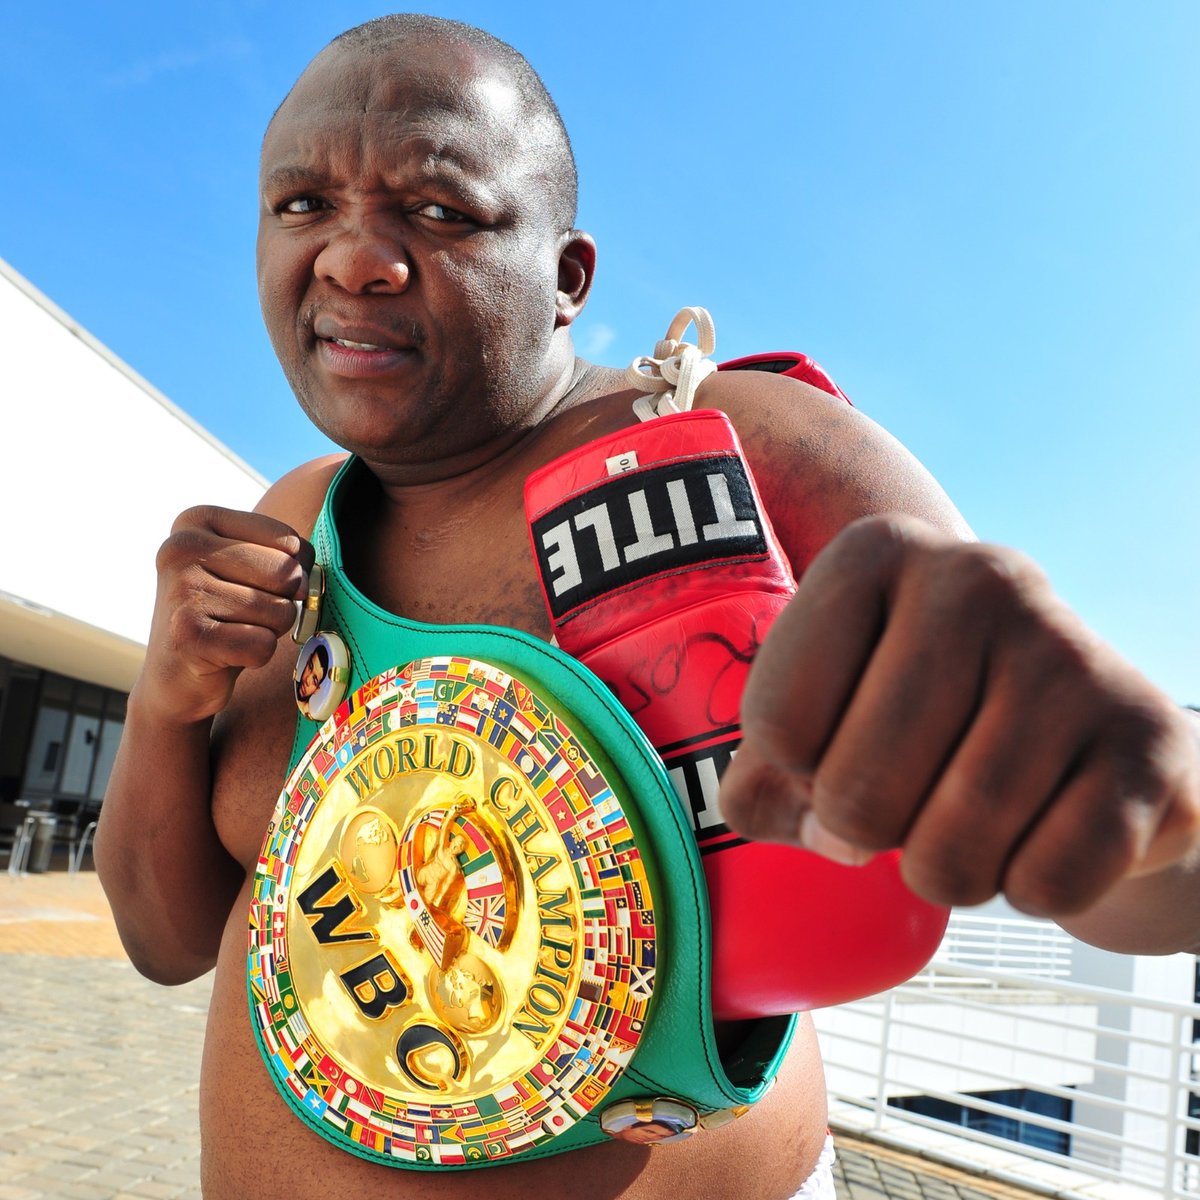 SARA mourns the untimely passing of former three-time world boxing champion, Dingaan Thobela. The legendary boxer from Chiawelo, fondly known as the 'Rose of Soweto' was an inspiration to many & always flew our flag 🇿🇦 high! #RestInPower #SonOfTheSoil